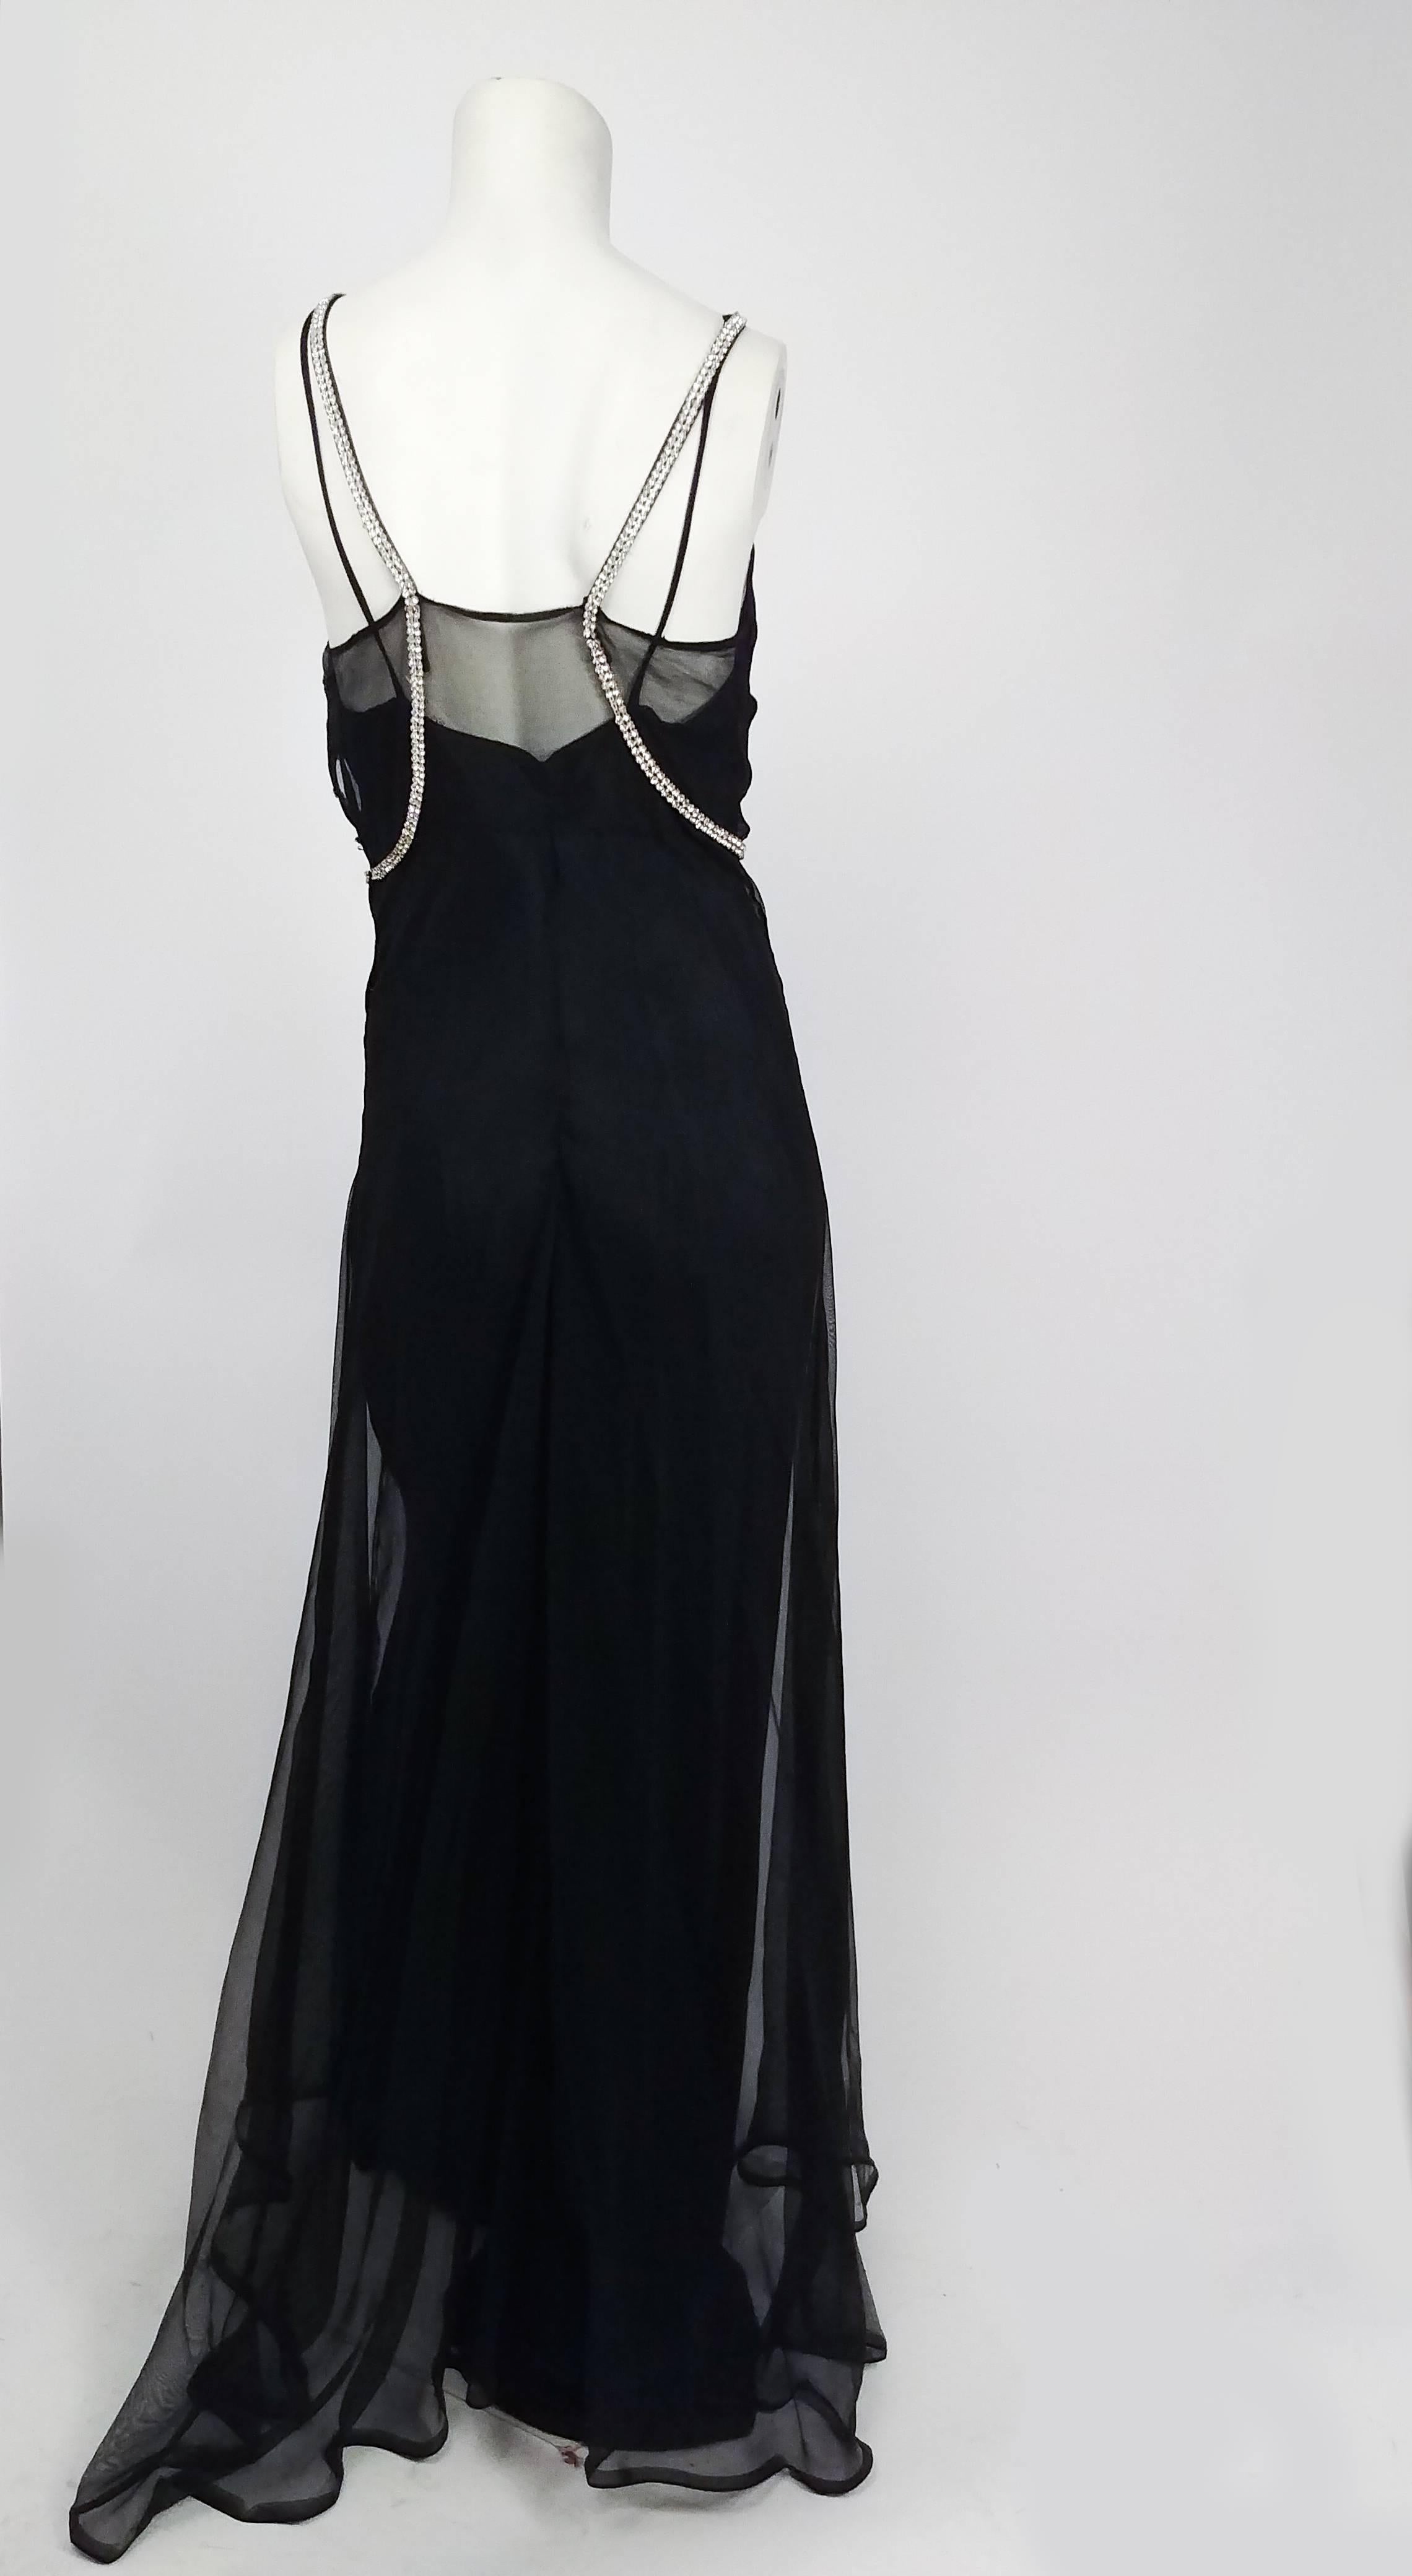 Women's 1930s Black Evening Gown with Rhinestone Detailing